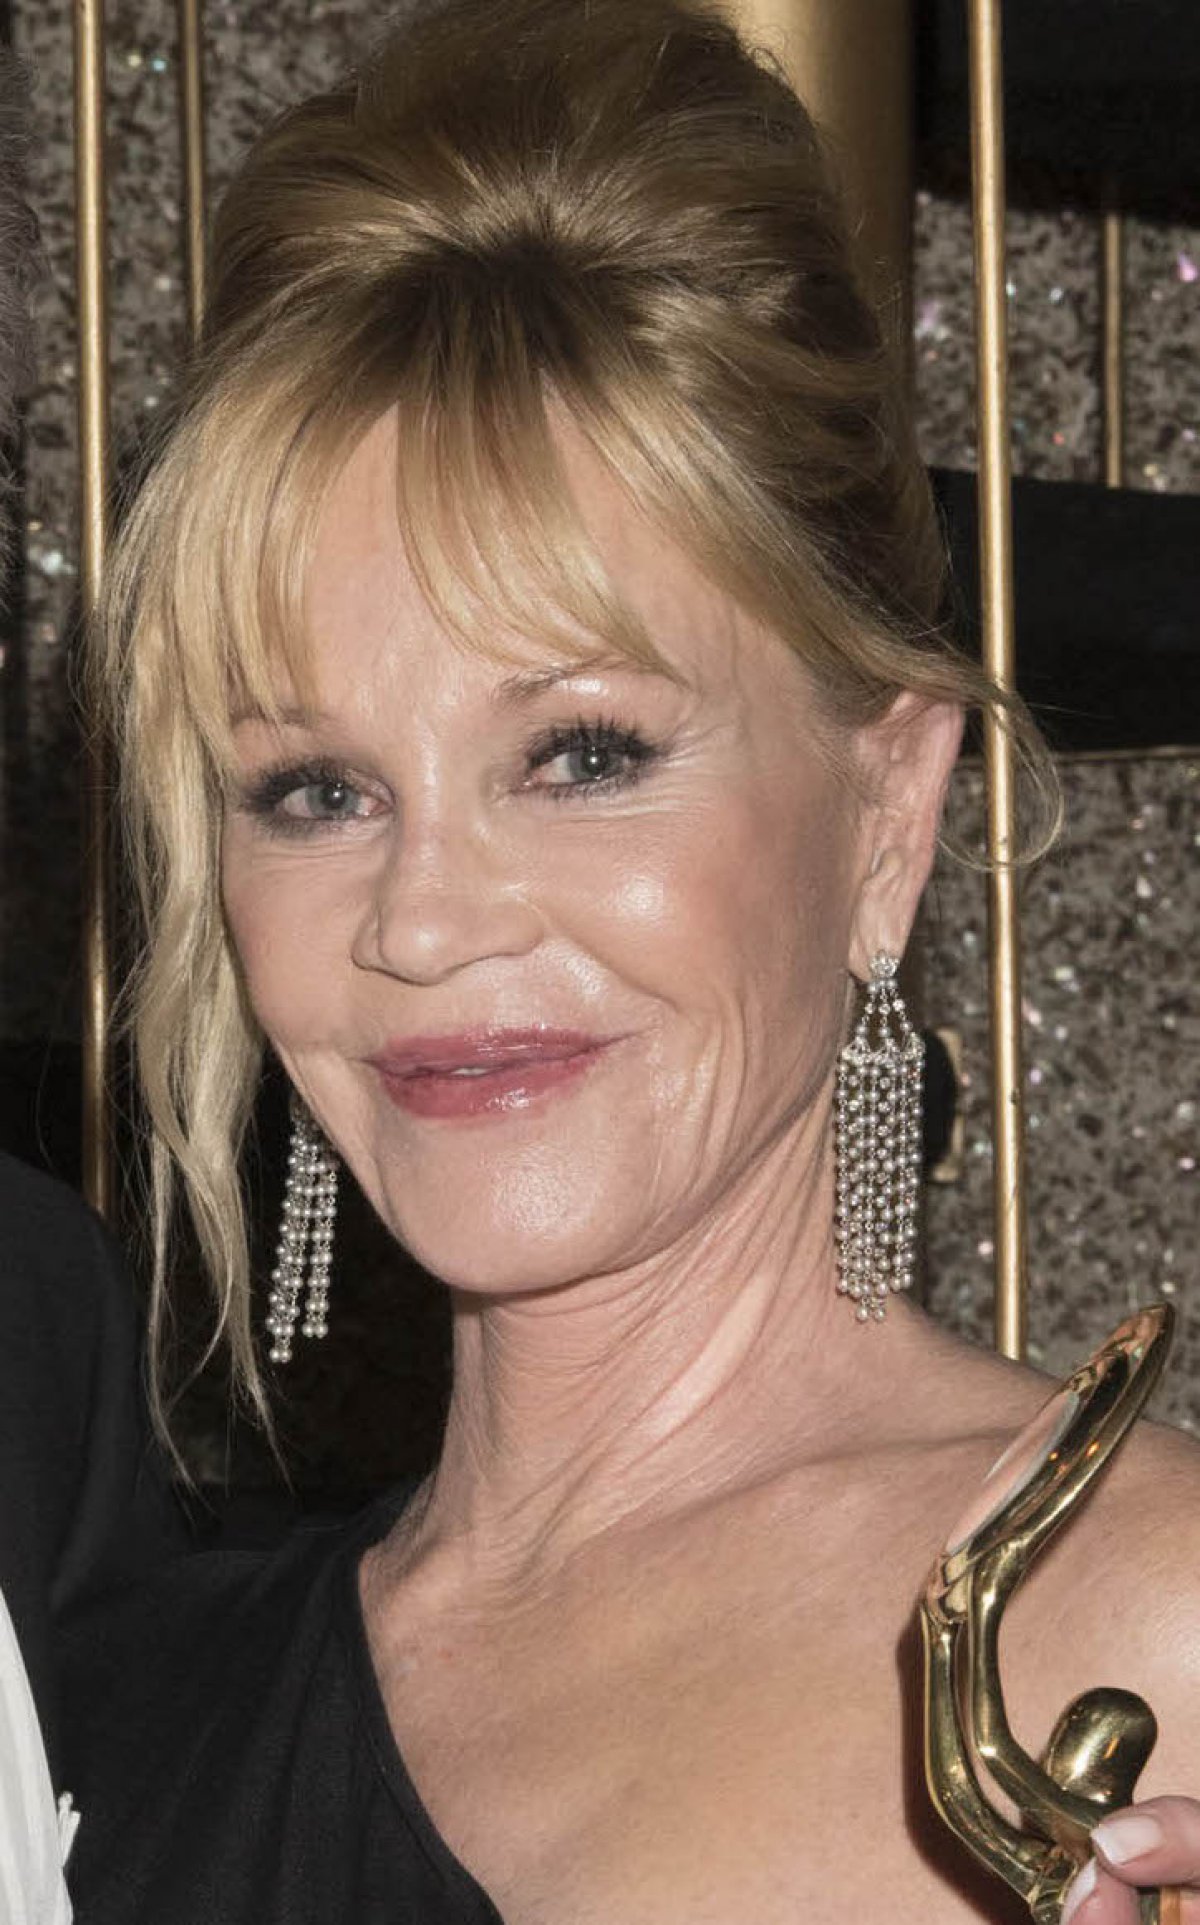 Designer Niklas J. Palm sues Melanie Griffith over Golden Globes gown - Reality TV World1200 x 1925